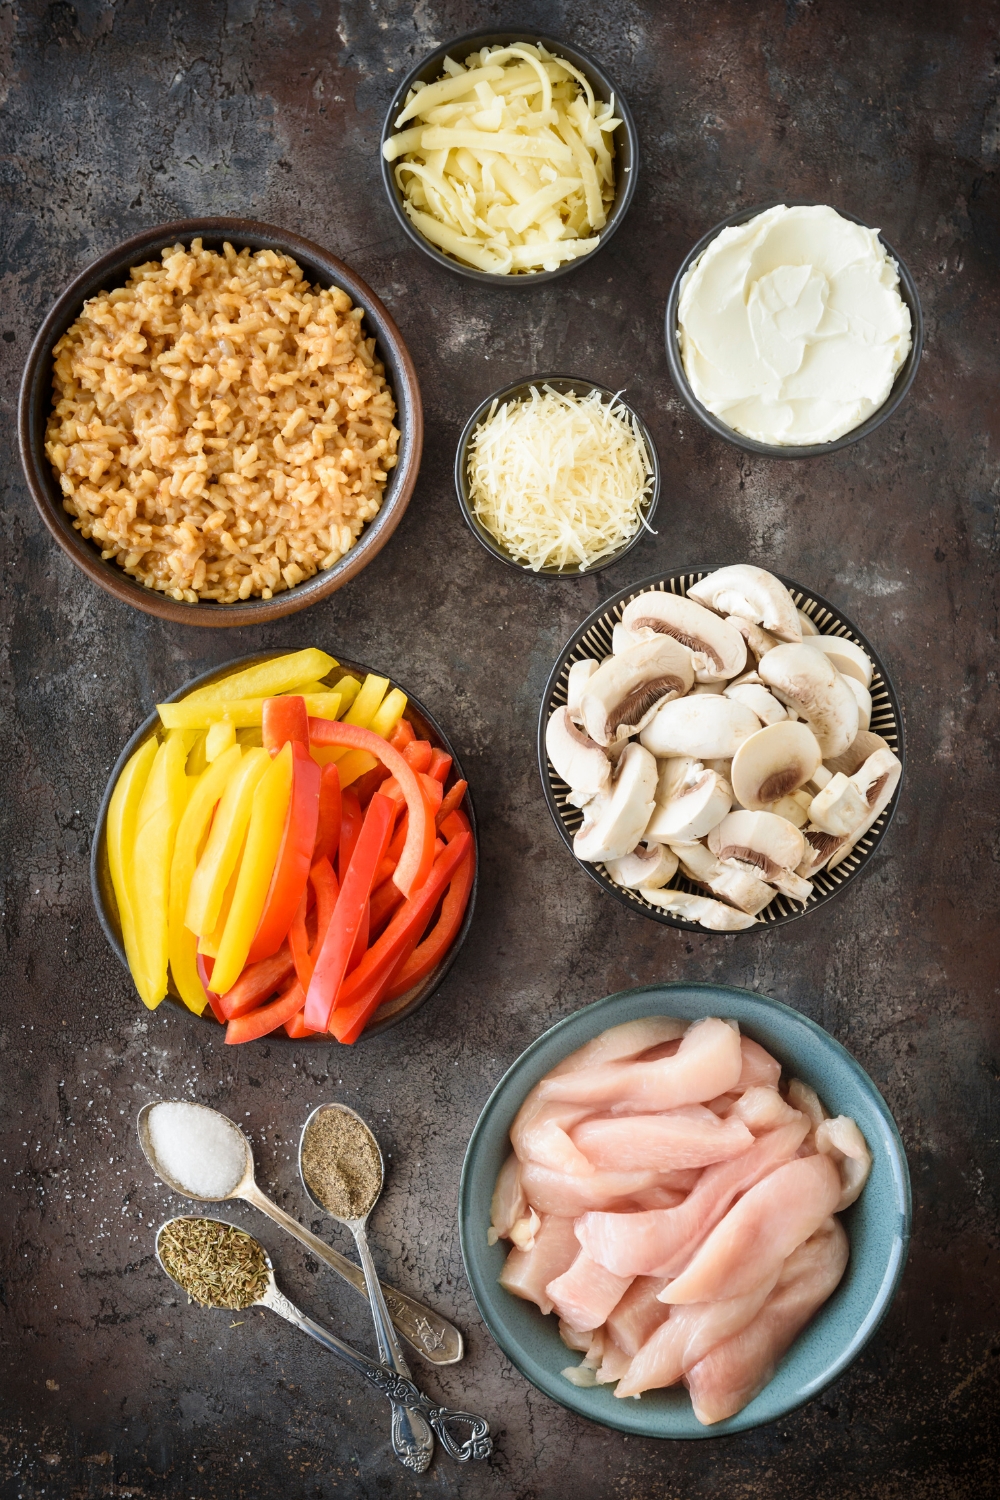 An assortment of ingredients including bowls of raw chicken strips, mushrooms, red and yellow peppers, rice, shredded cheese, cream cheese, and spoonfuls of spices.